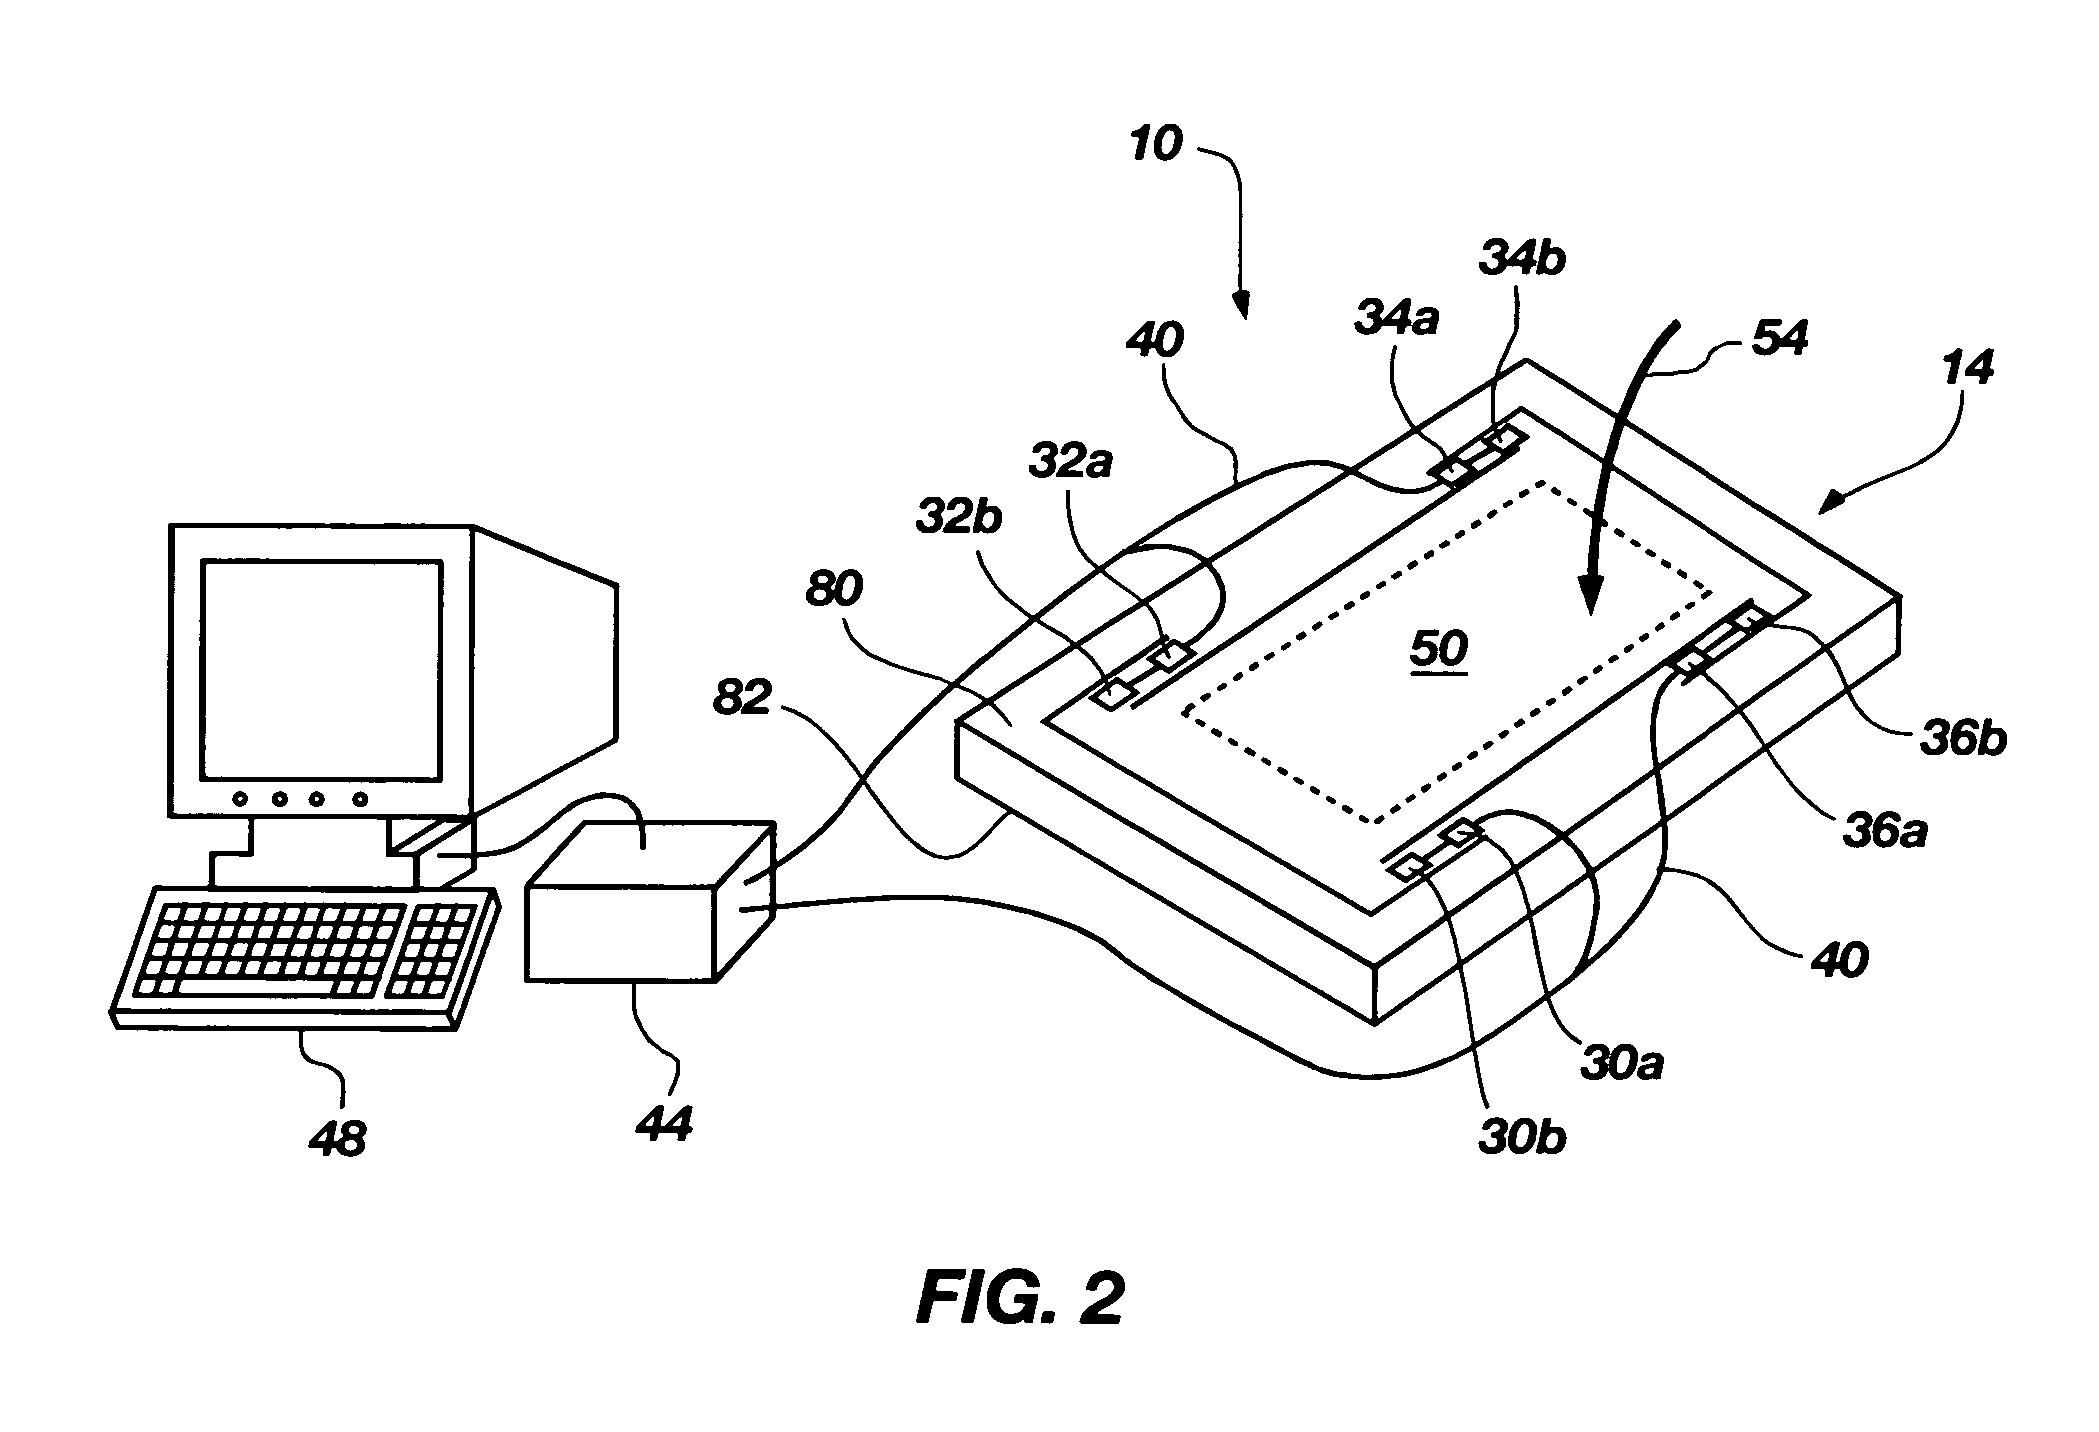 Force-based input device